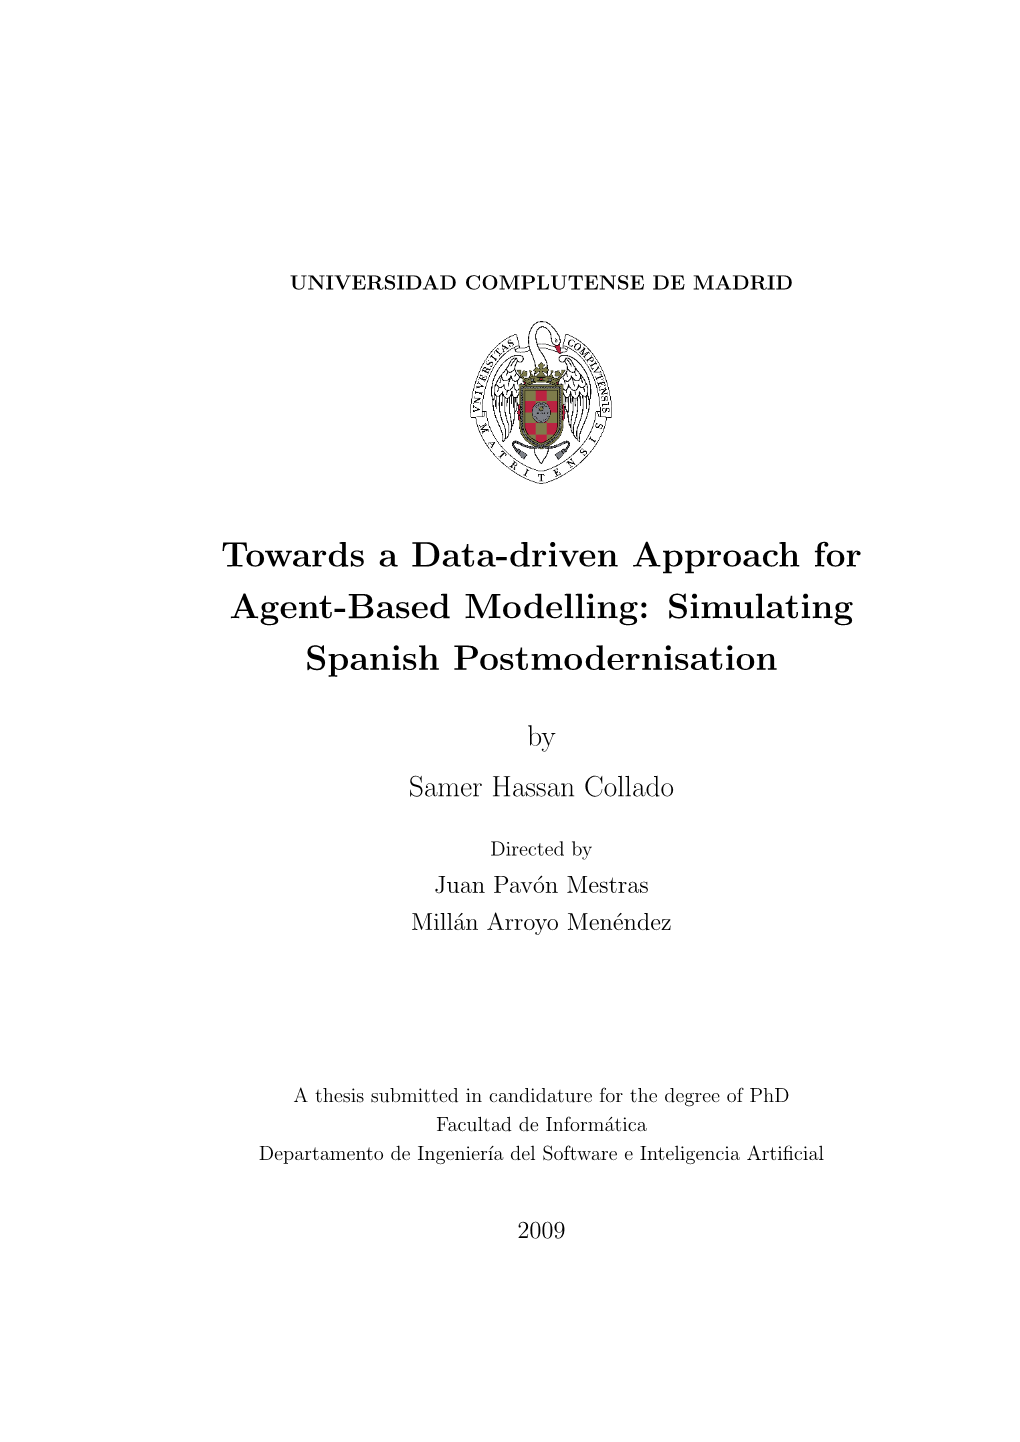 Towards a Data-Driven Approach for Agent-Based Modelling: Simulating Spanish Postmodernisation